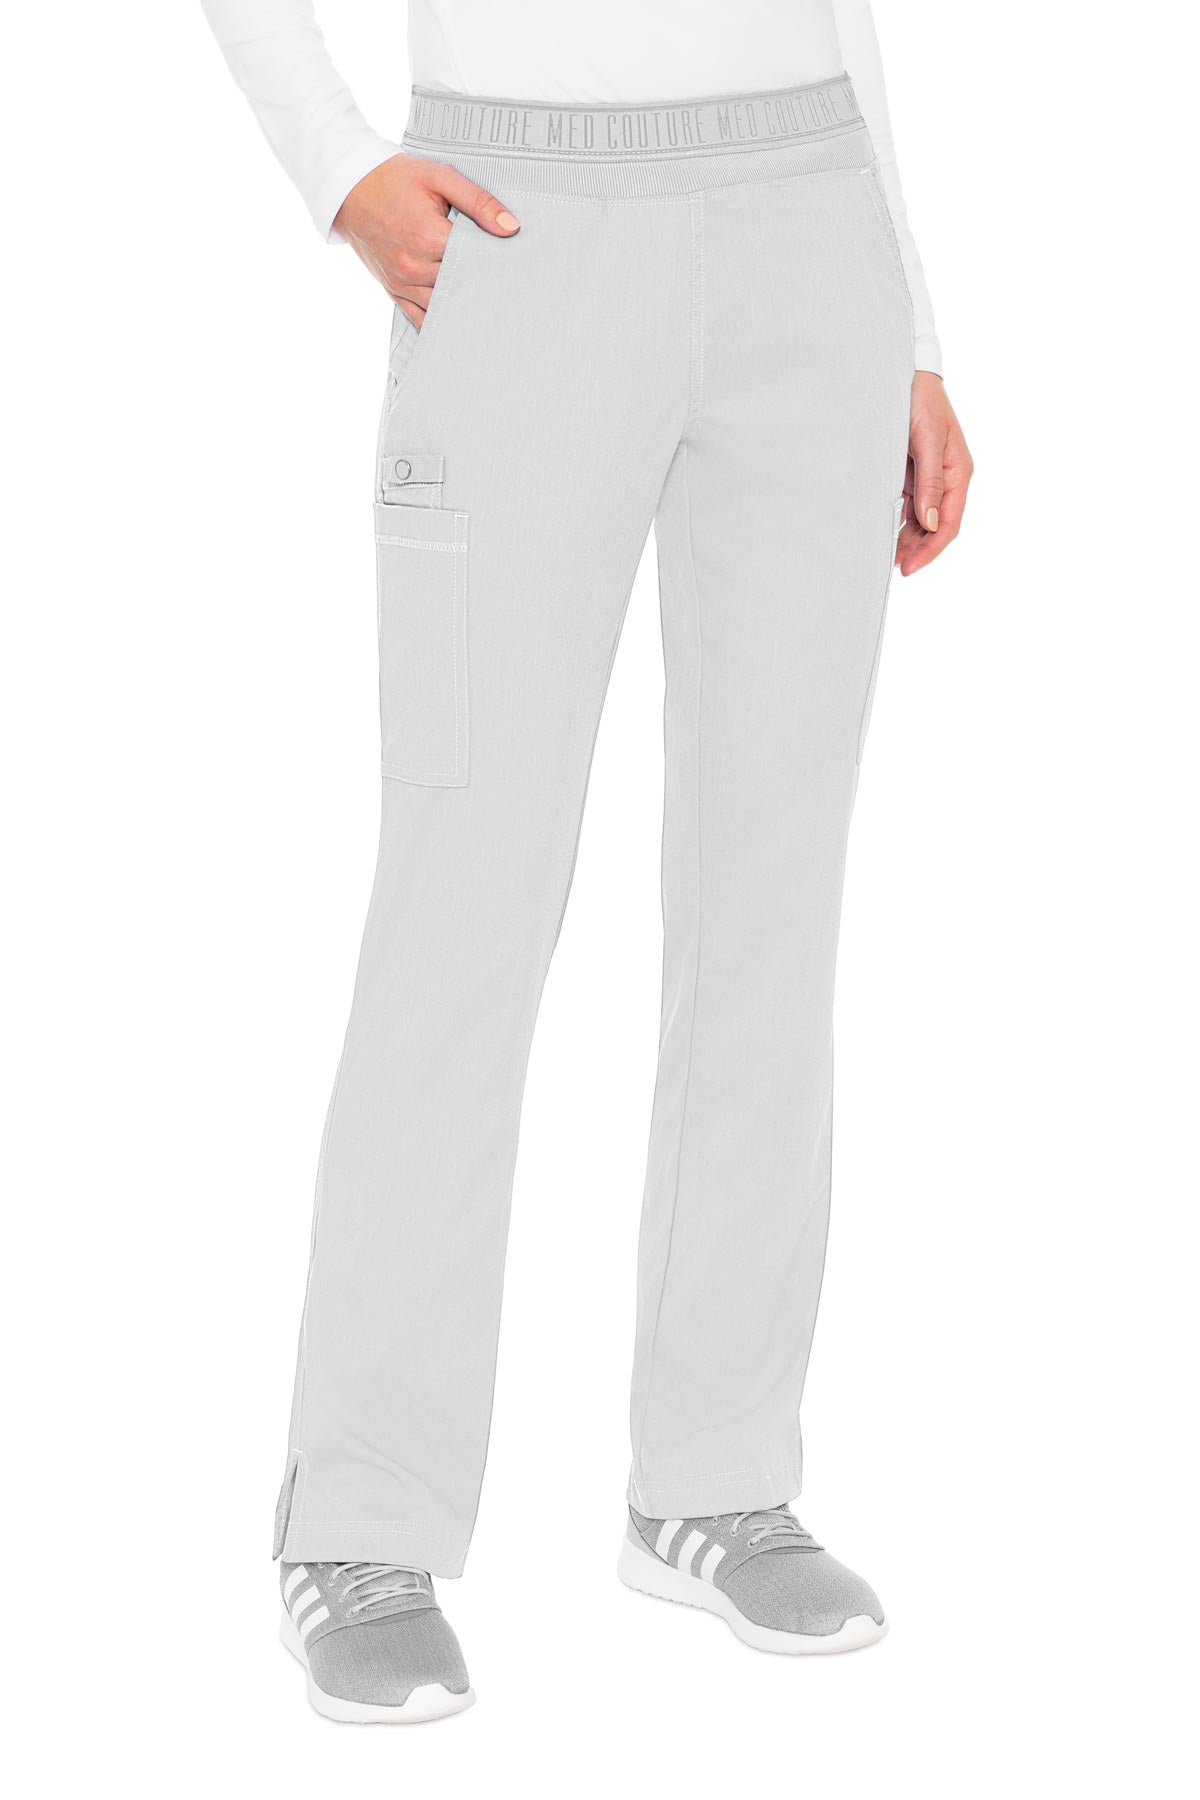 7739 Med Couture Touch Women's Yoga 2 Cargo Pocket Pant – The